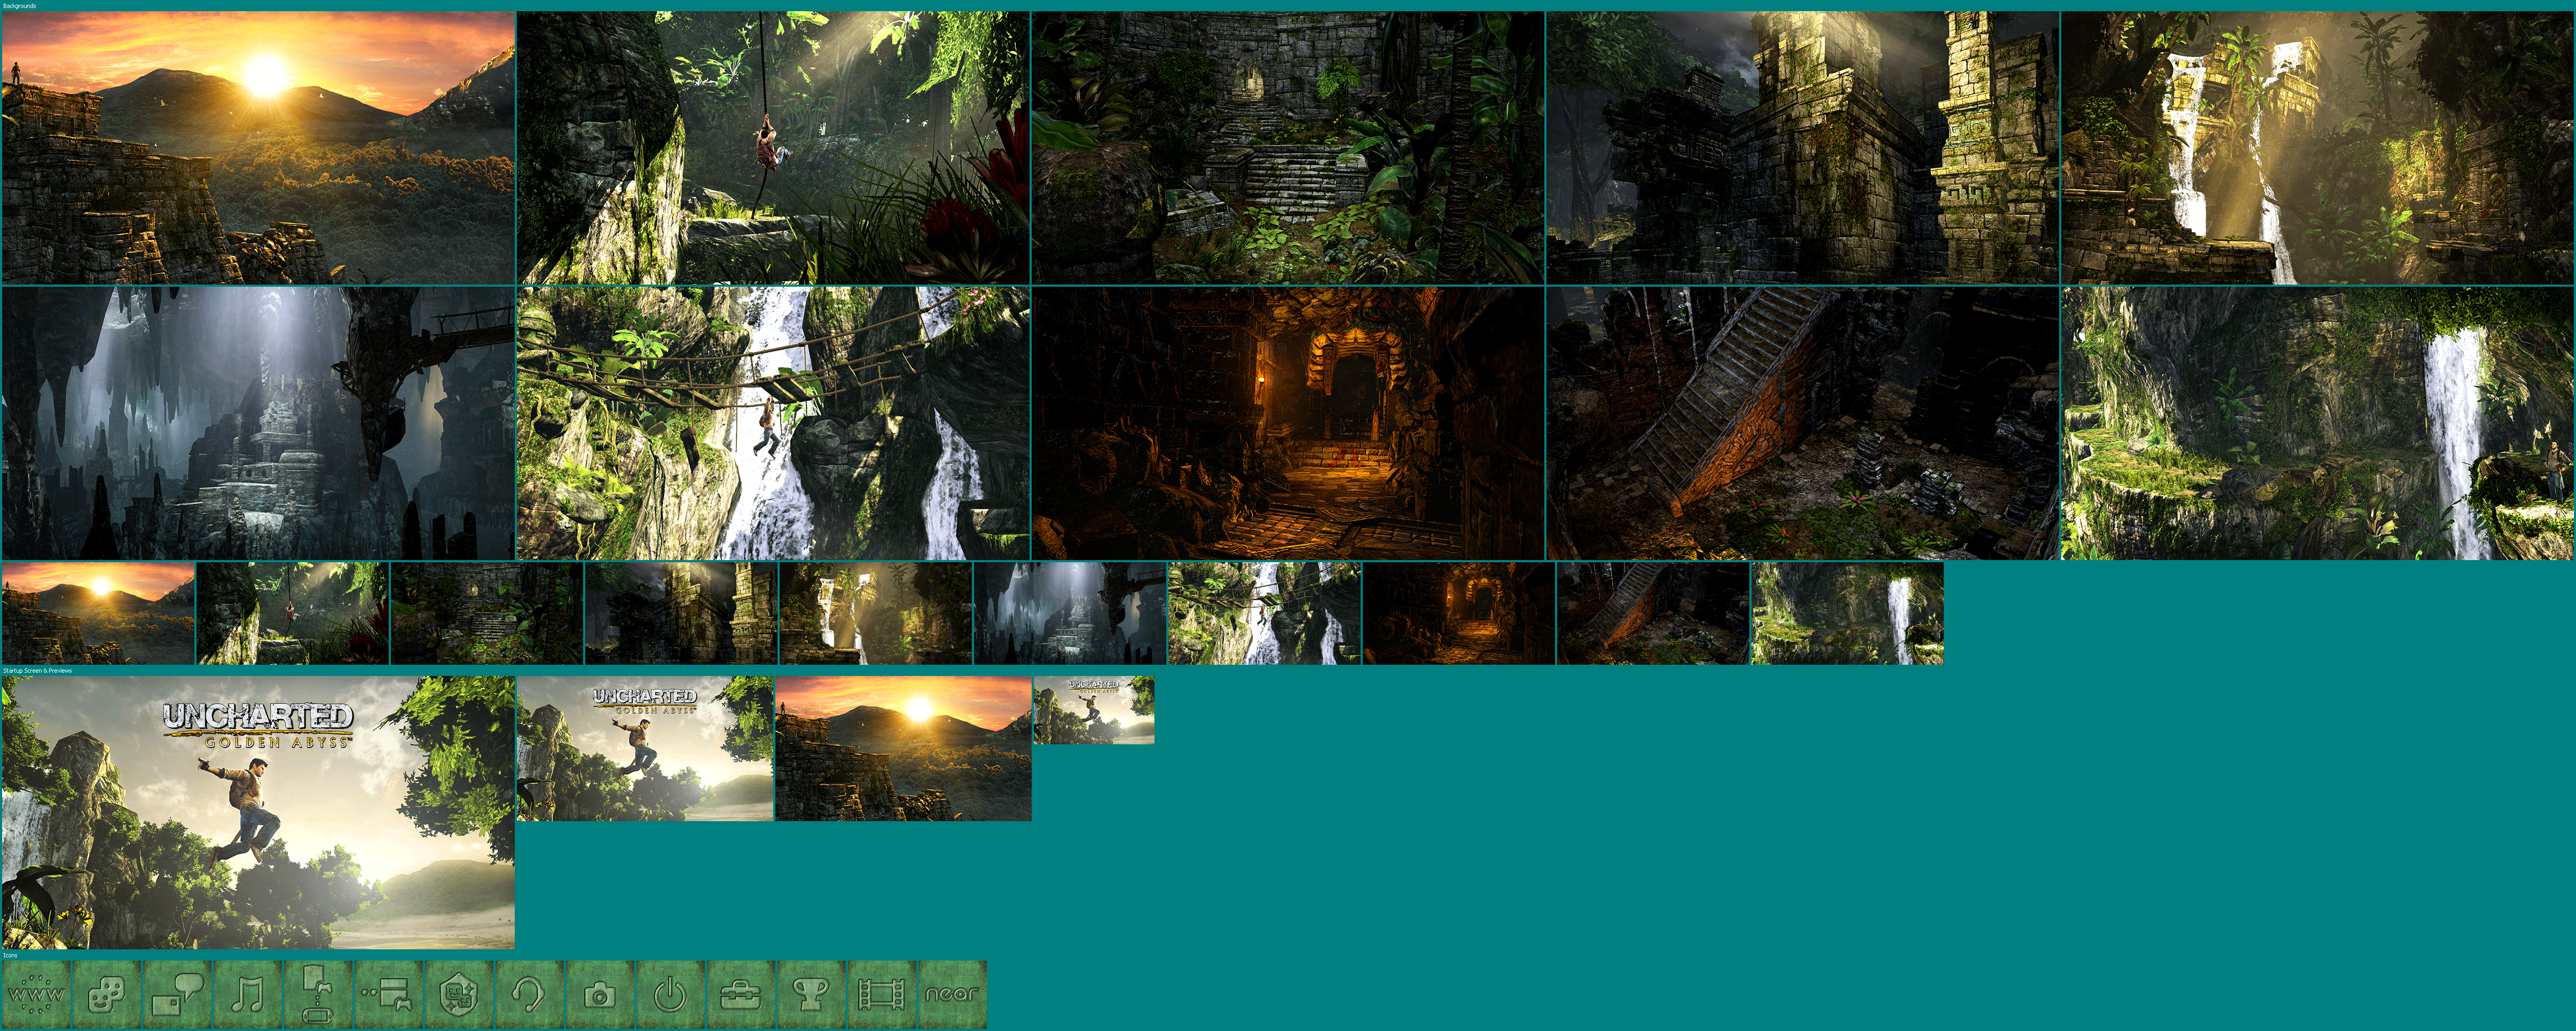 PlayStation Vita Themes - Uncharted: Golden Abyss